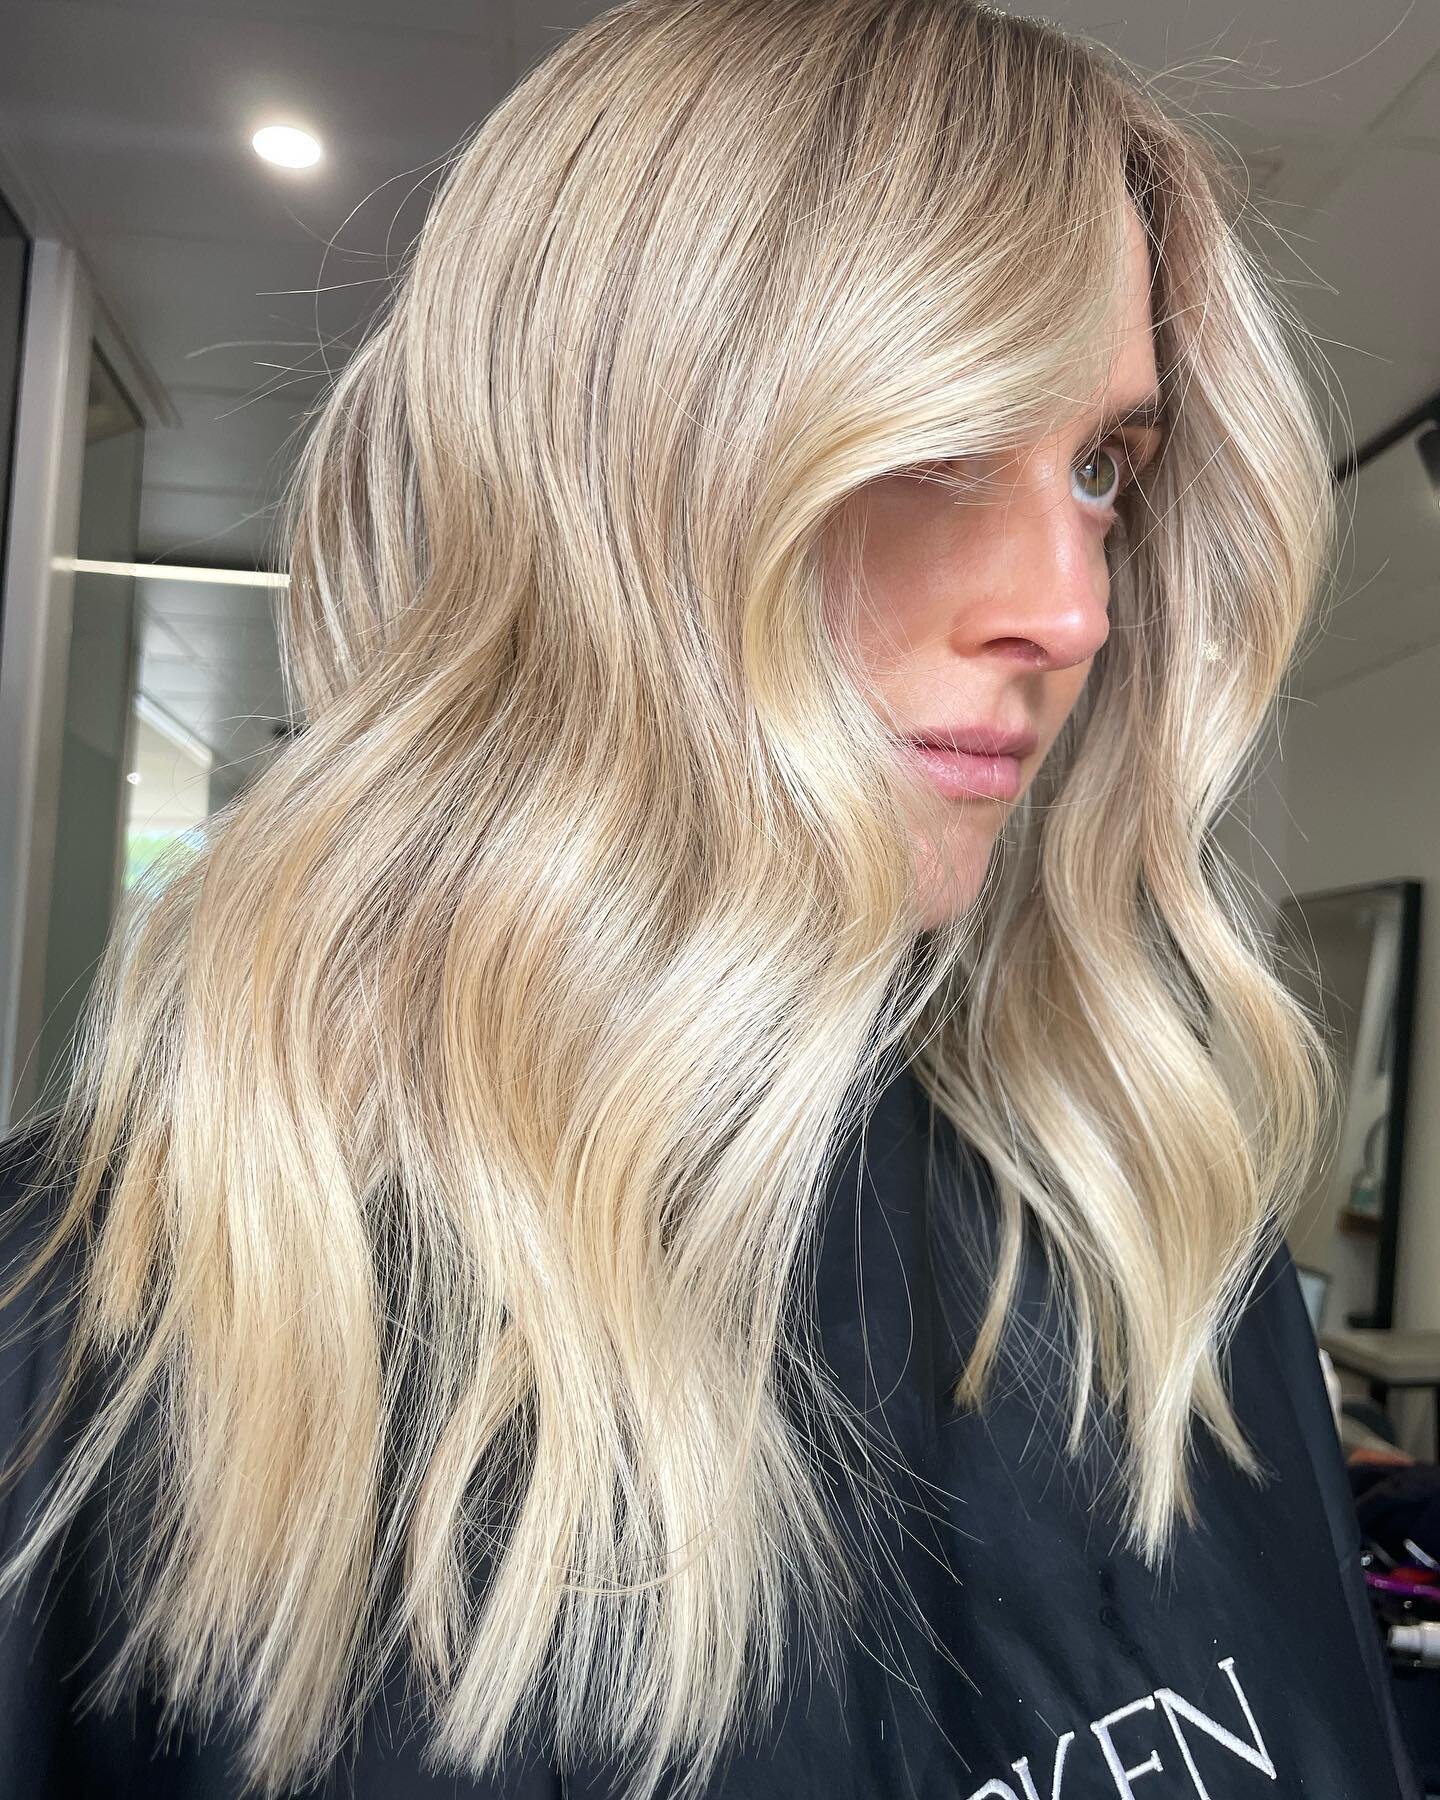 When it comes to blondes sometimes it&rsquo;s nice to be Vanilla 🤭

Blonde By @jess_studiolioness 💕